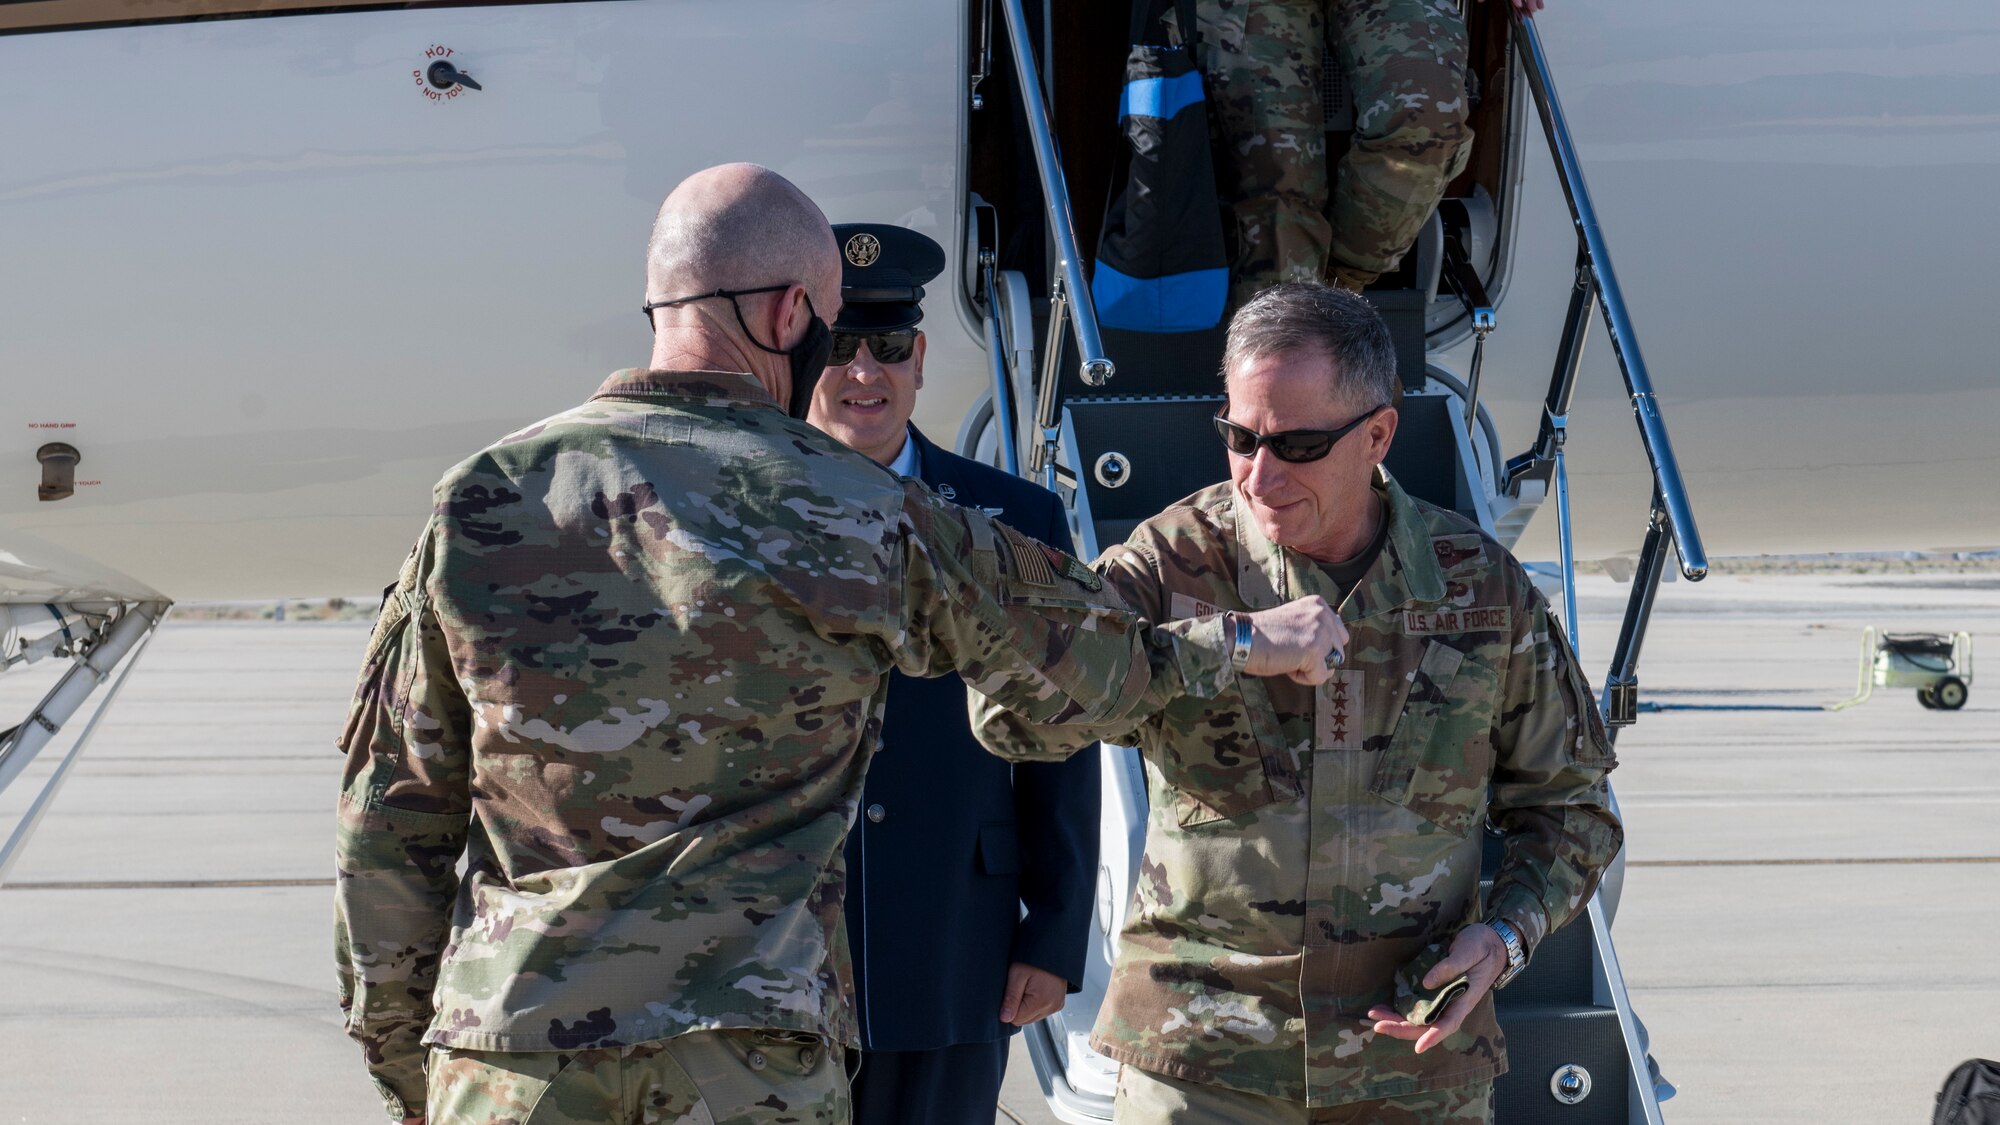 Maj. Gen. Christopher Azzano, Air Force Test Center commander, greets Air Force Chief of Staff Gen. David Goldfein at Edwards Air Force Base, California, June 17. (Air Force photo by Giancarlo Casem)